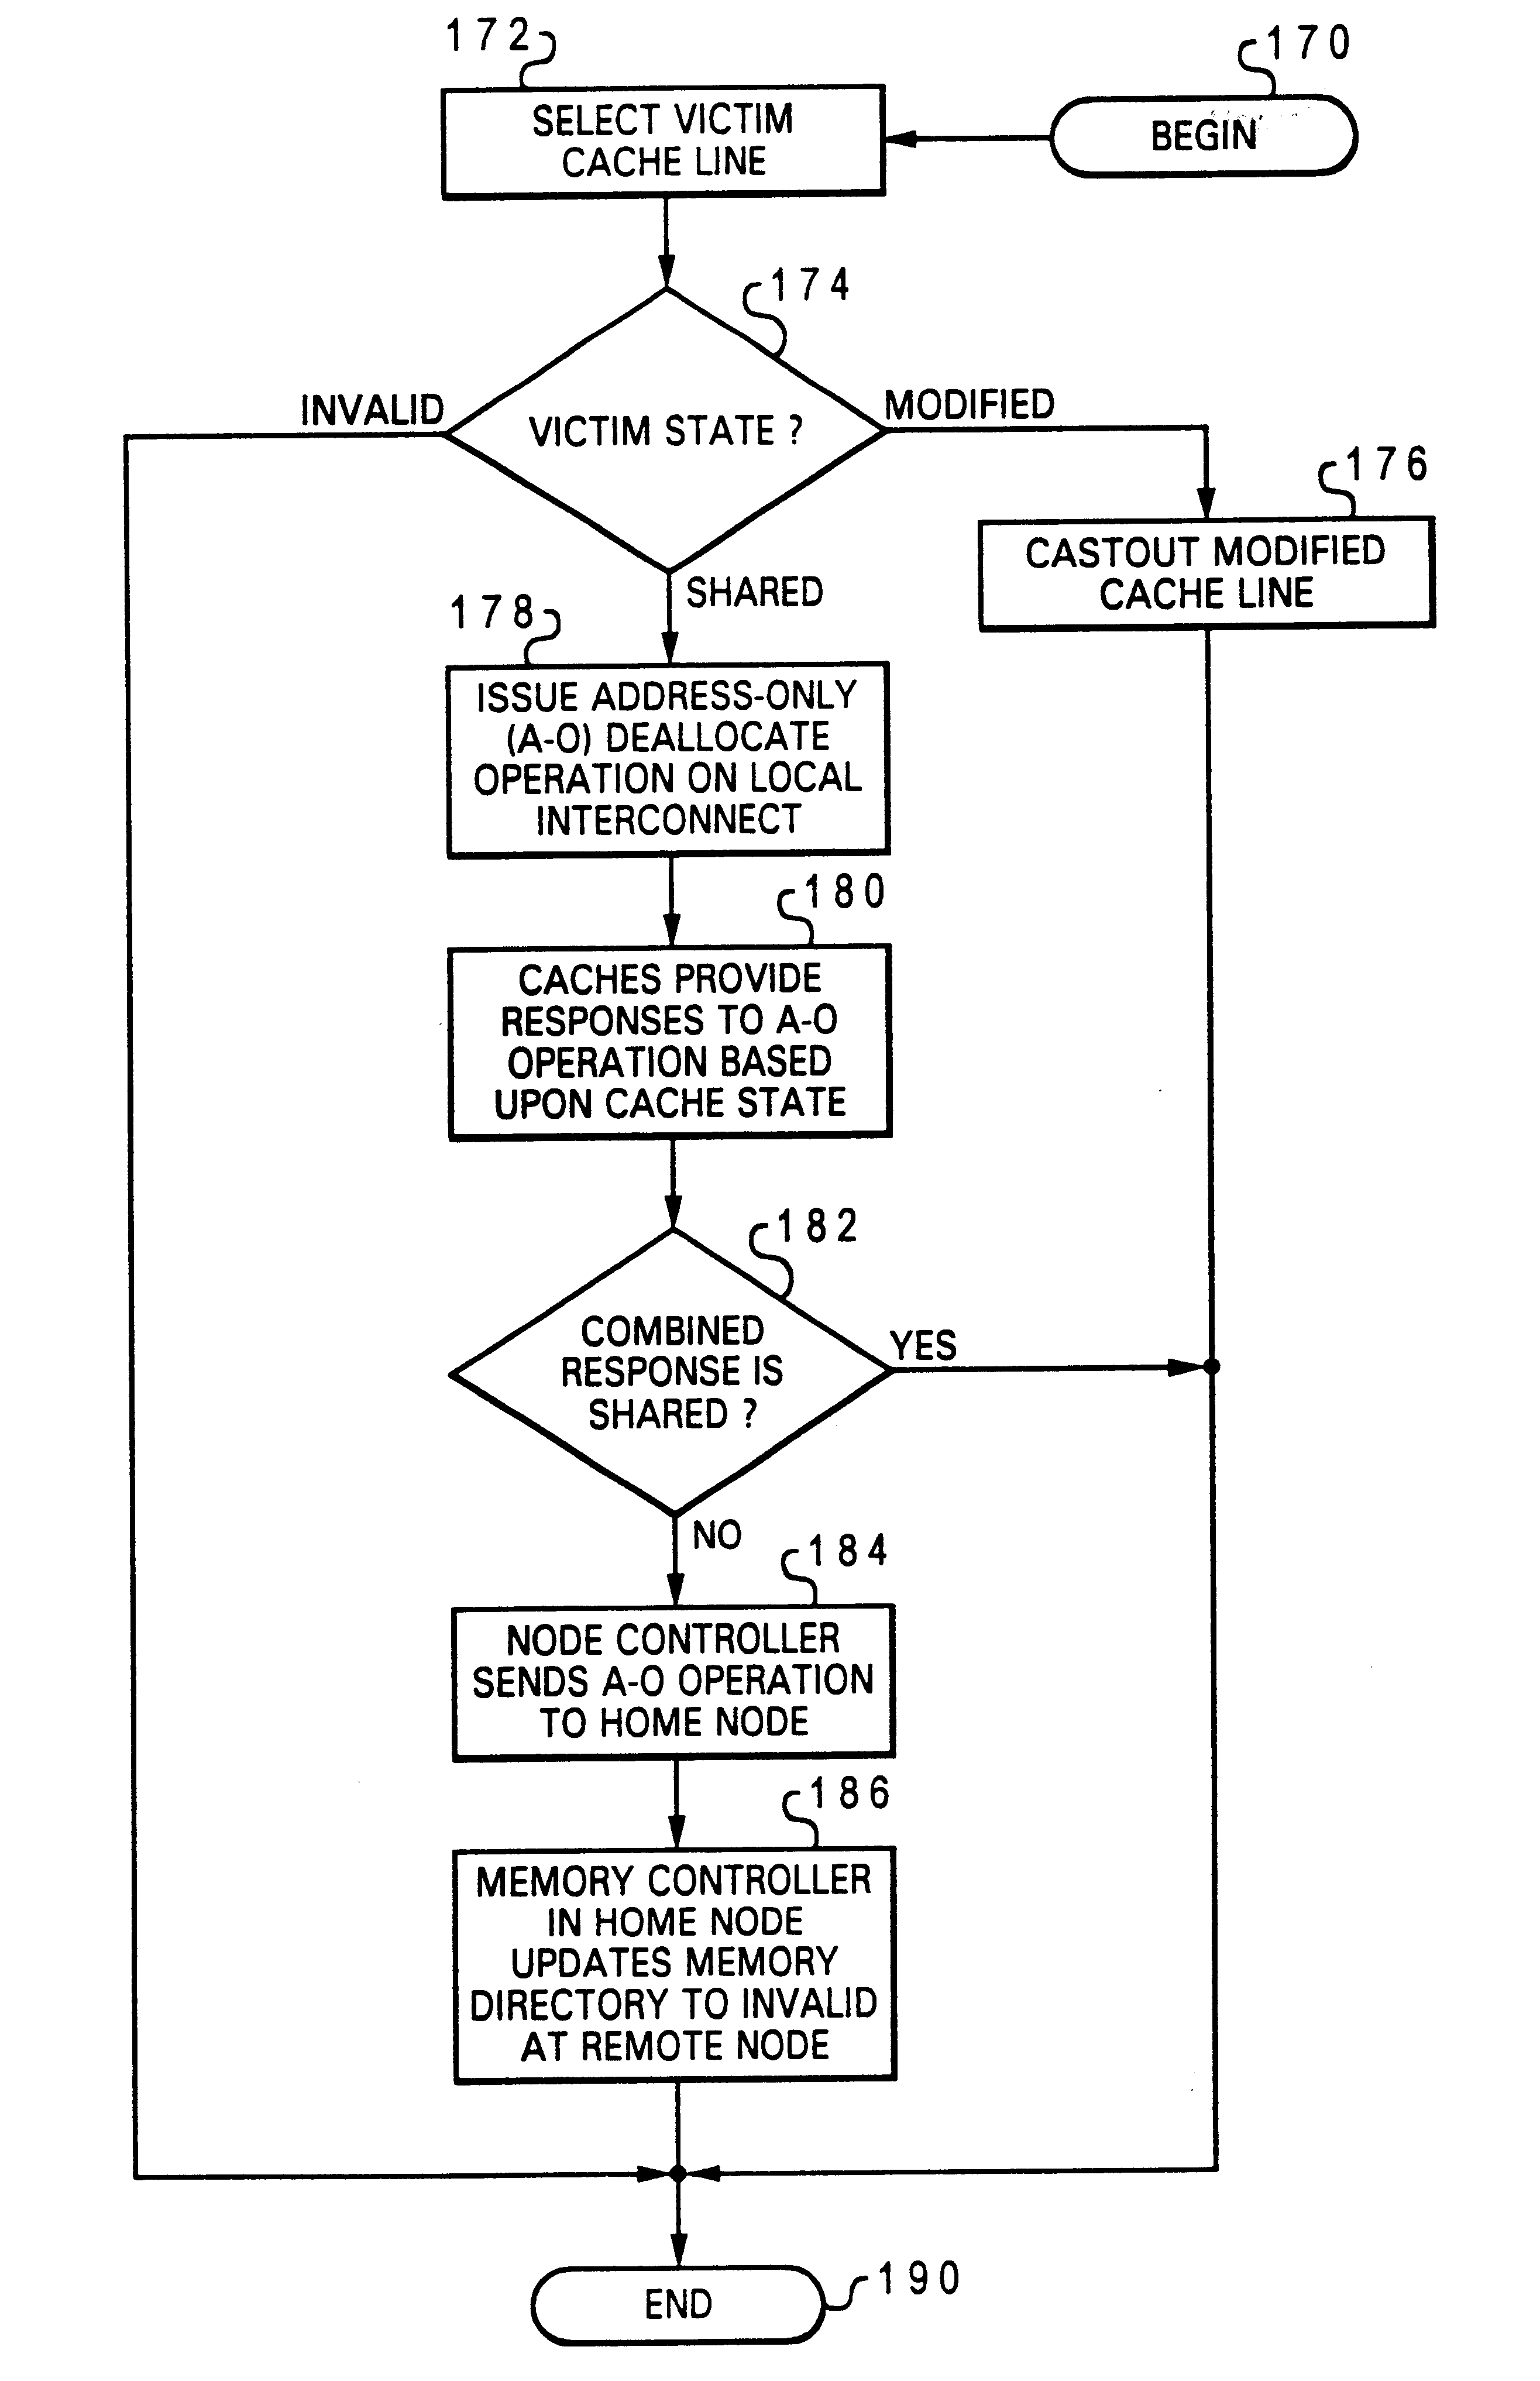 Non-uniform memory access (NUMA) data processing system that provides notification of remote deallocation of shared data